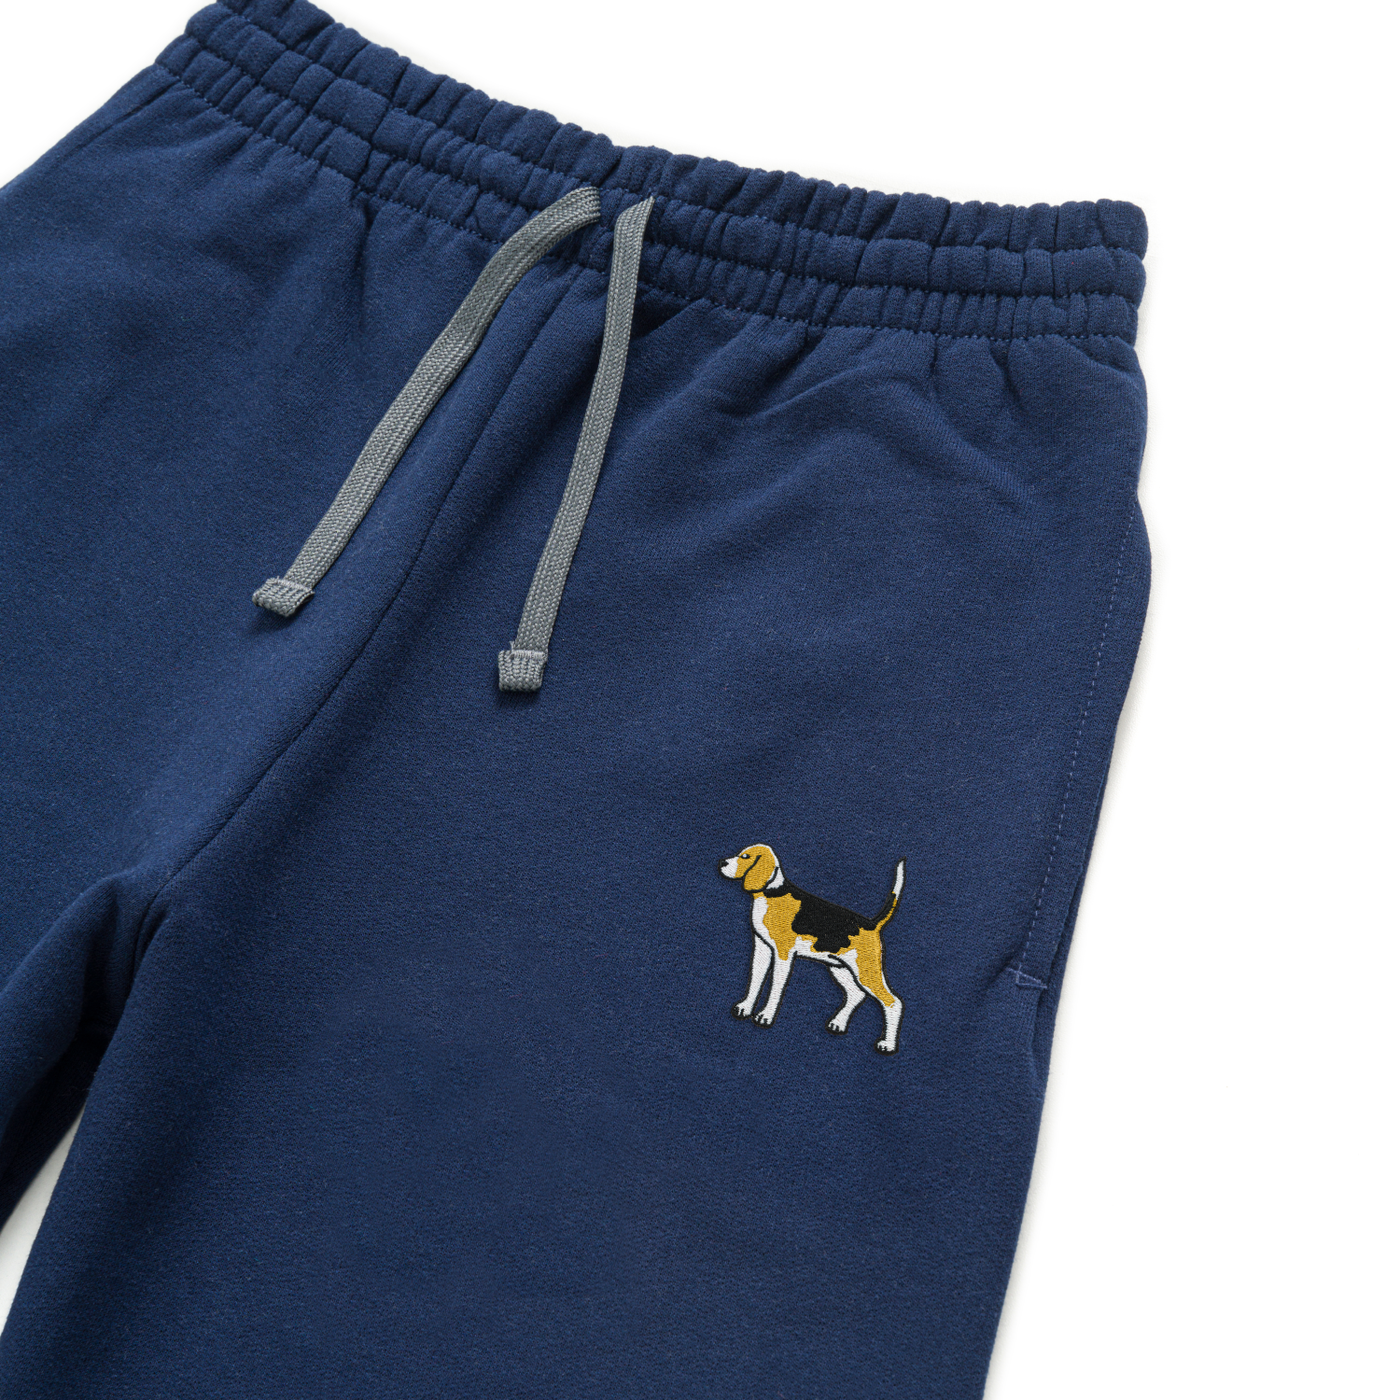 Bobby's Planet Unisex Embroidered Beagle Joggers from Paws Dog Cat Animals Collection in Navy Color#color_navy